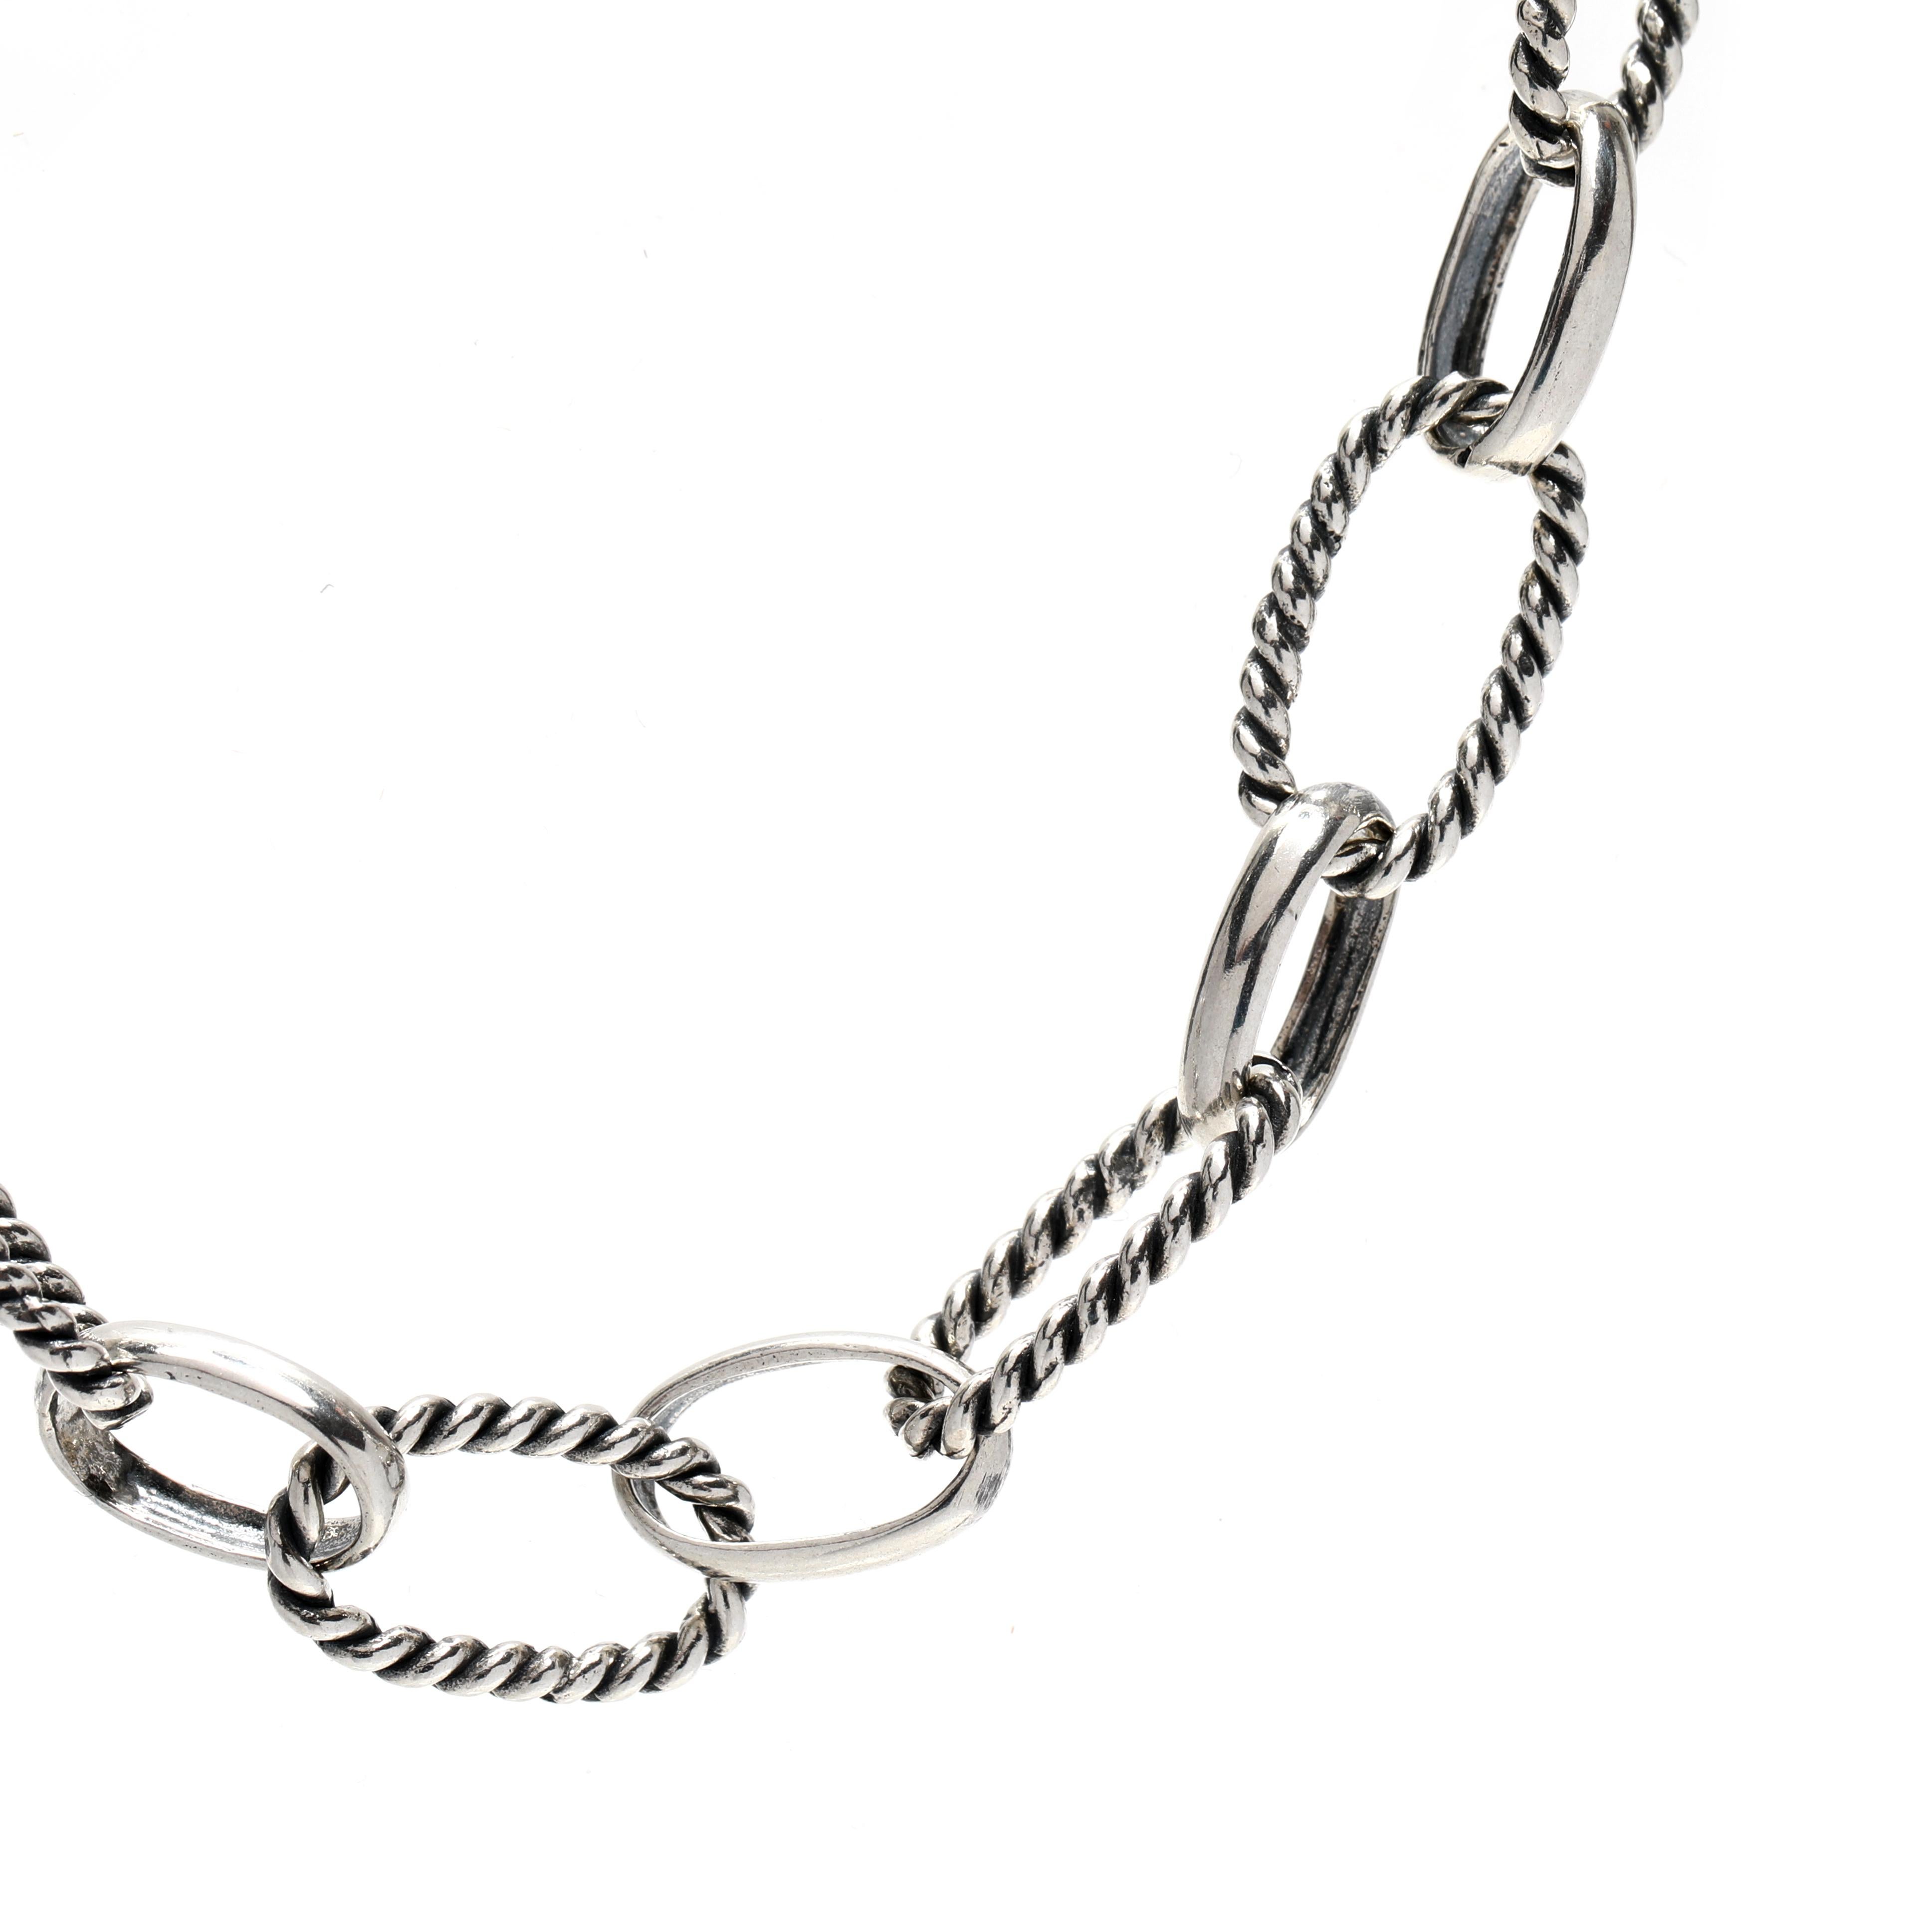 This beautiful Oval Link Toggle Chain is crafted from sterling silver and is 18 inches in length. With a large cable link chain and rope and polish links, this chain is perfect for any occasion or everyday wear. Whether you're looking for a chain to